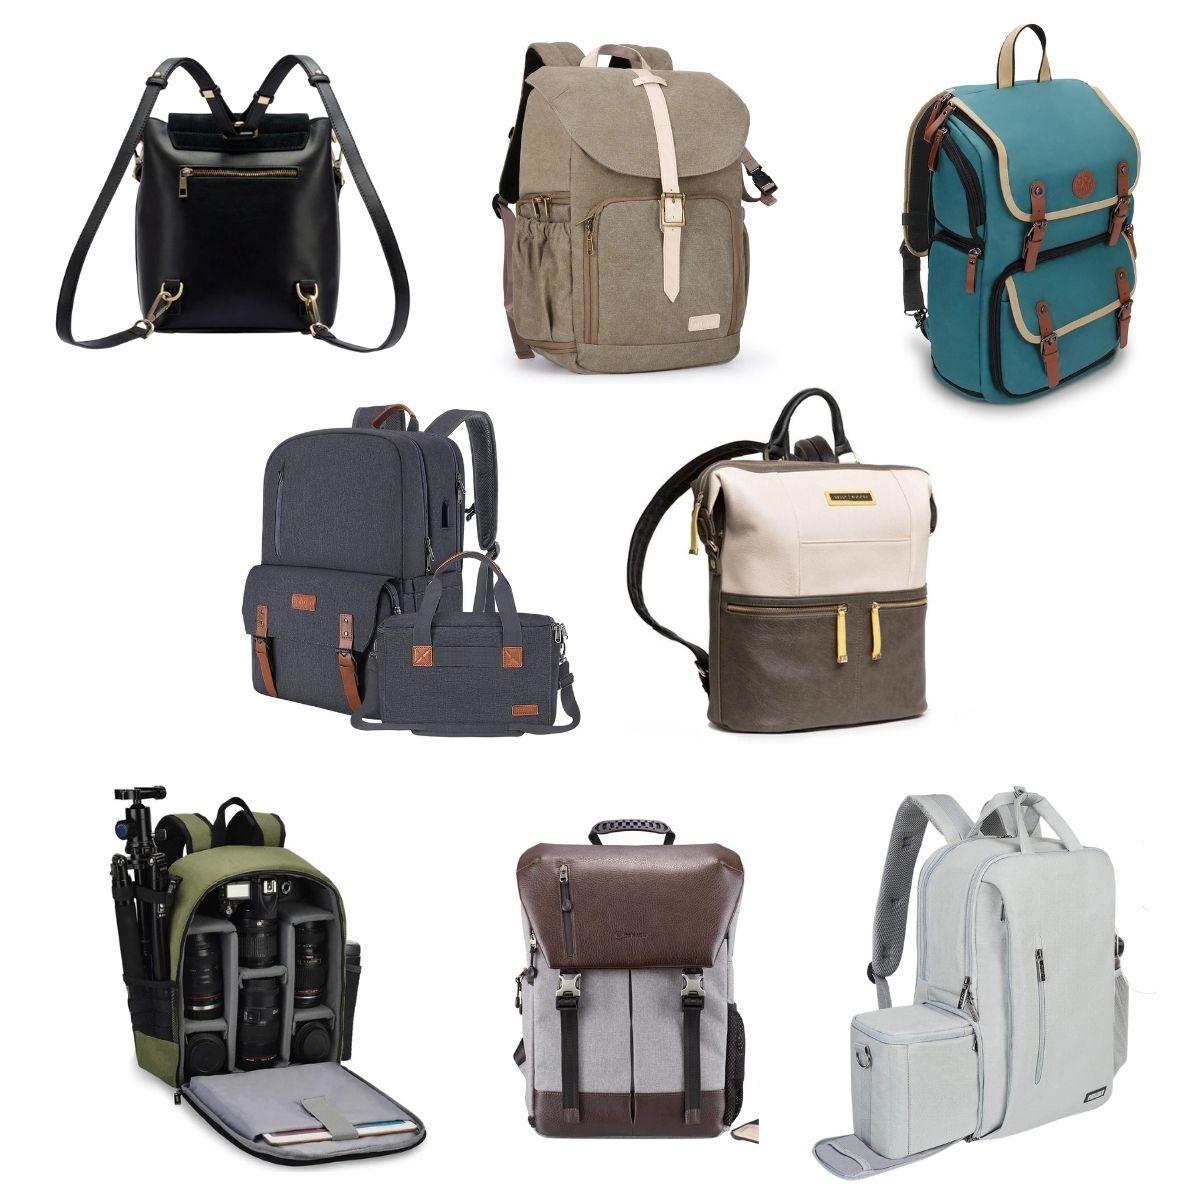 16 Backpack Camera Bags for Women - Snap Happy Mom